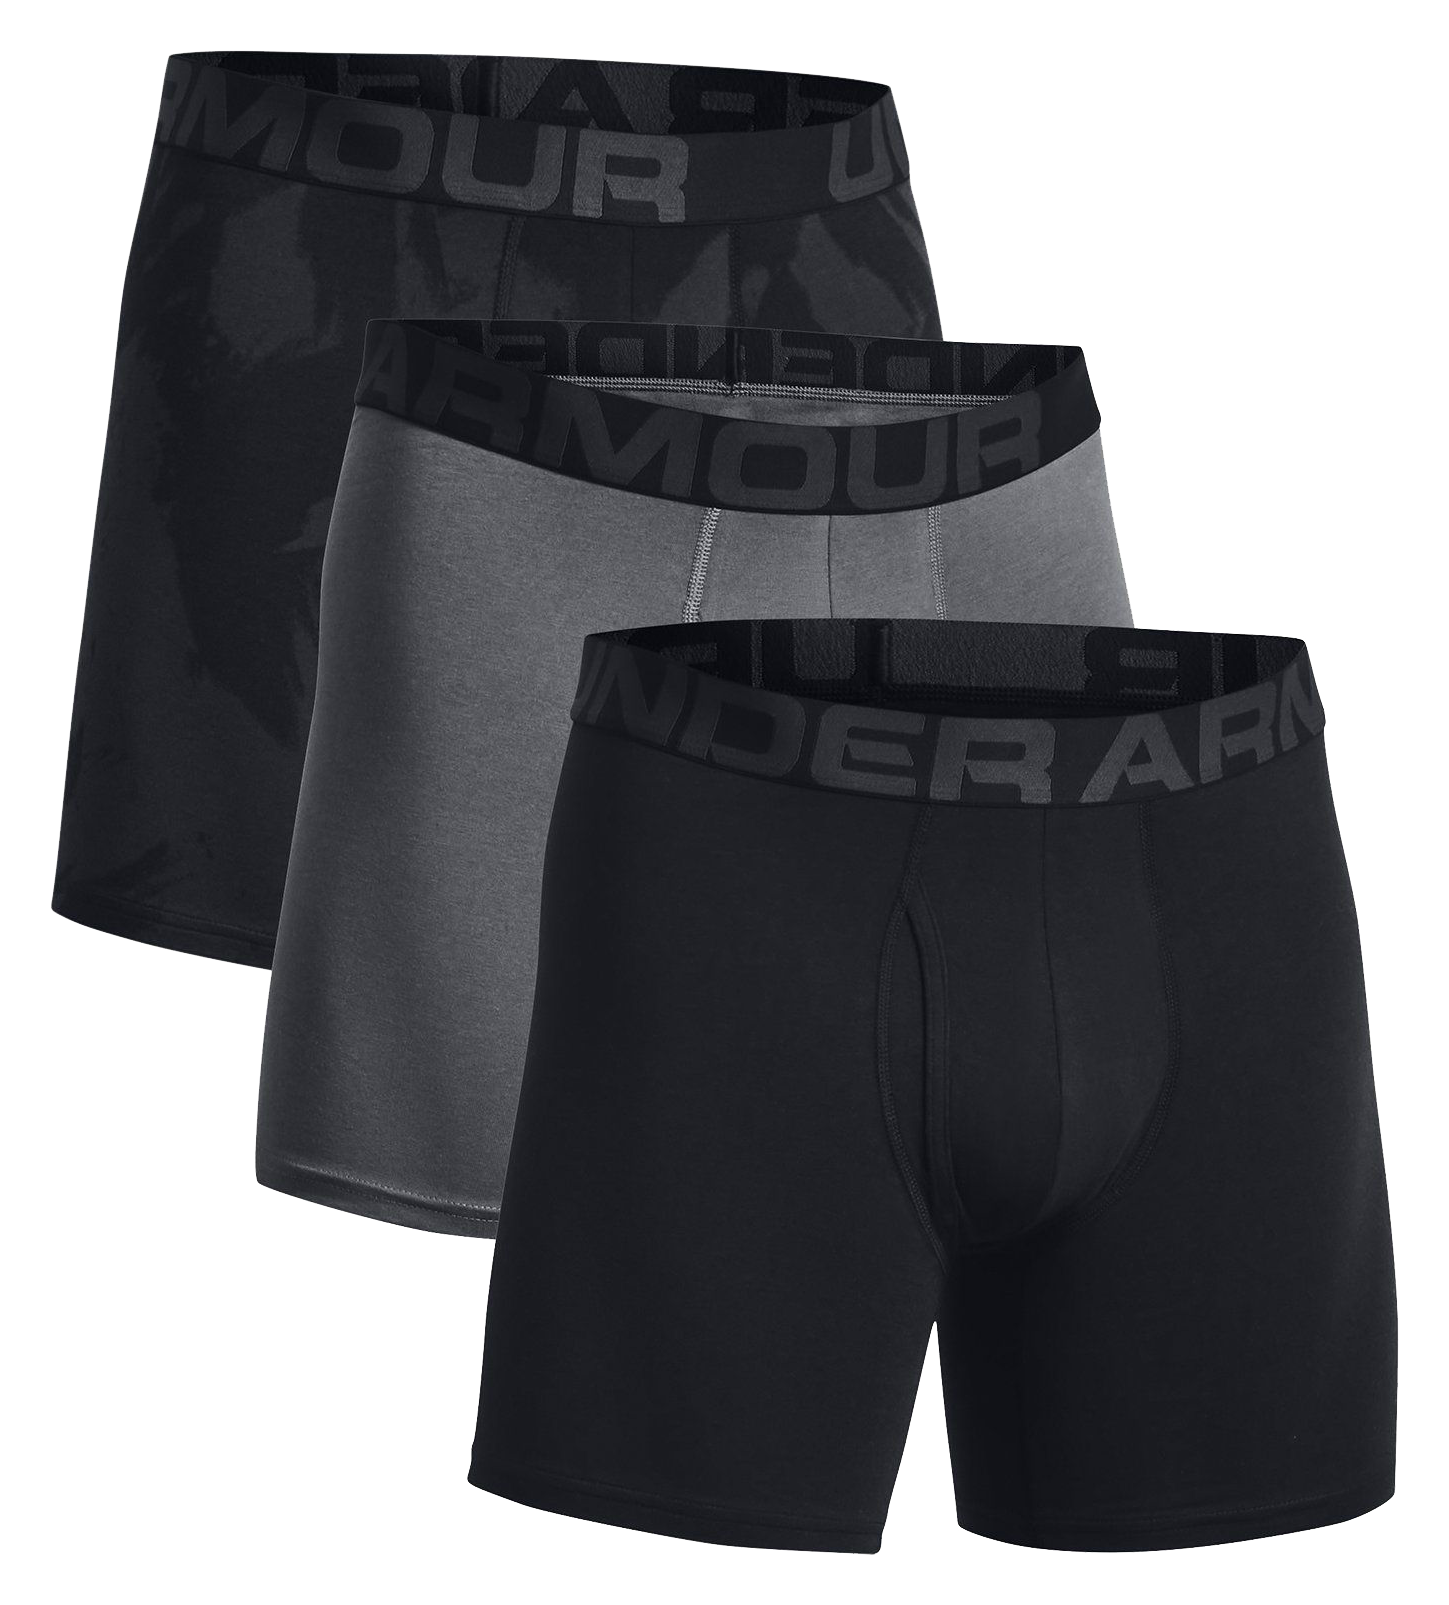 Under Armour Charged Cotton 6"" Patterned Boxerjock for Men - Black/Pitch Gray/Jet Gray - 4XL